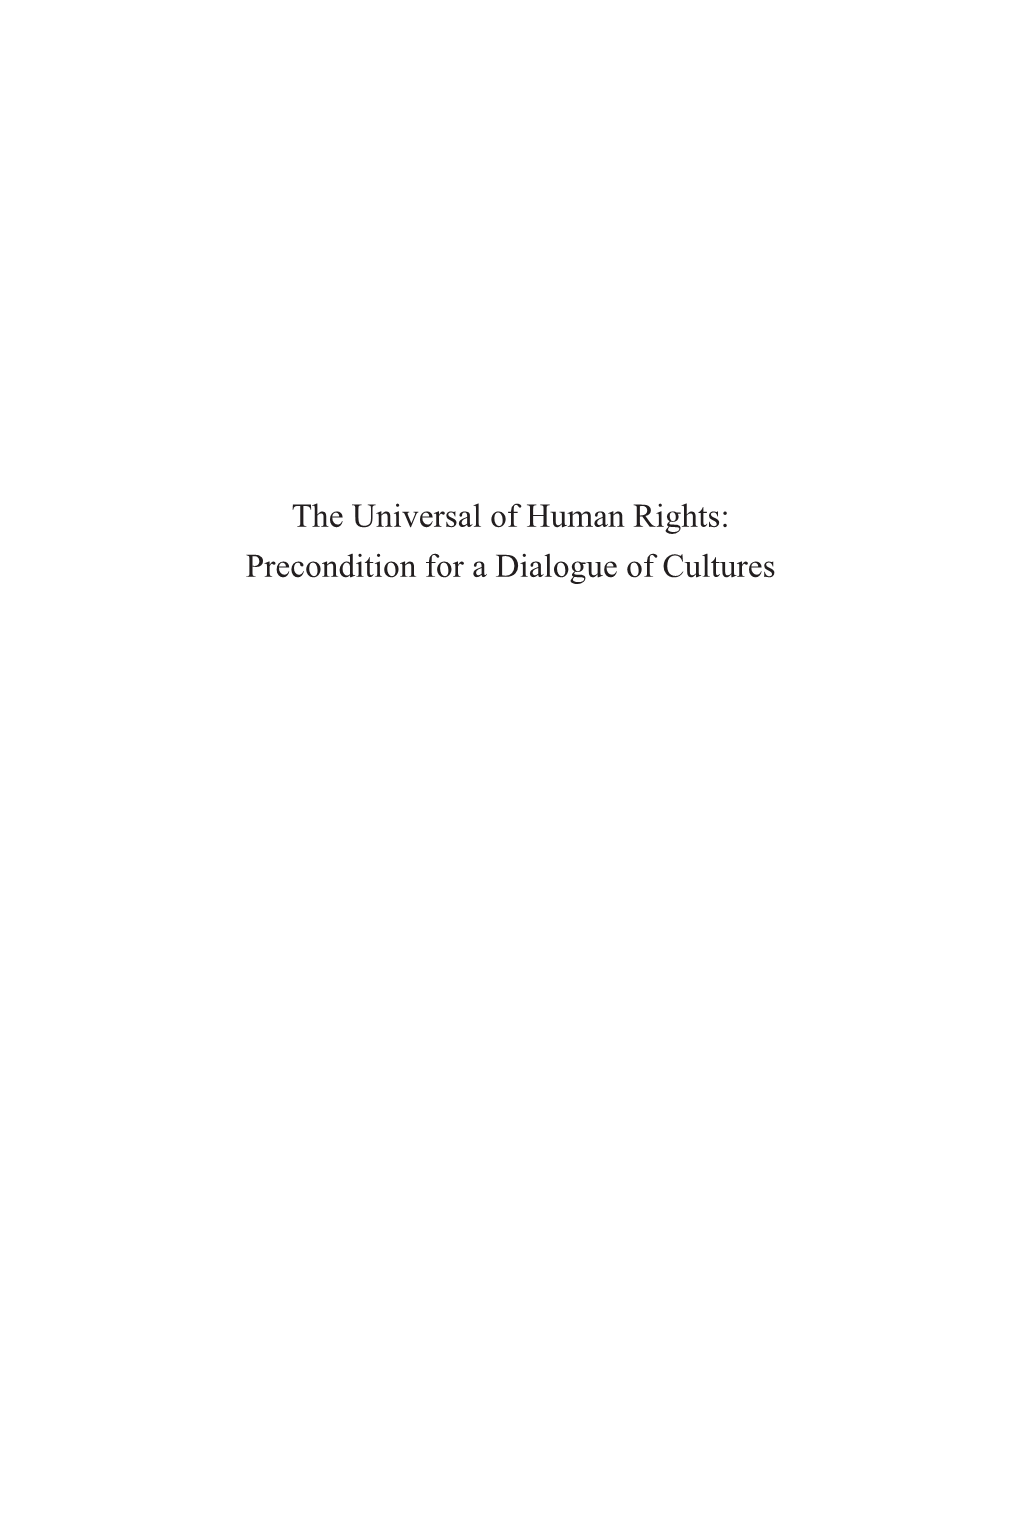 The Universal of Human Rights: Precondition for a Dialogue of Cultures